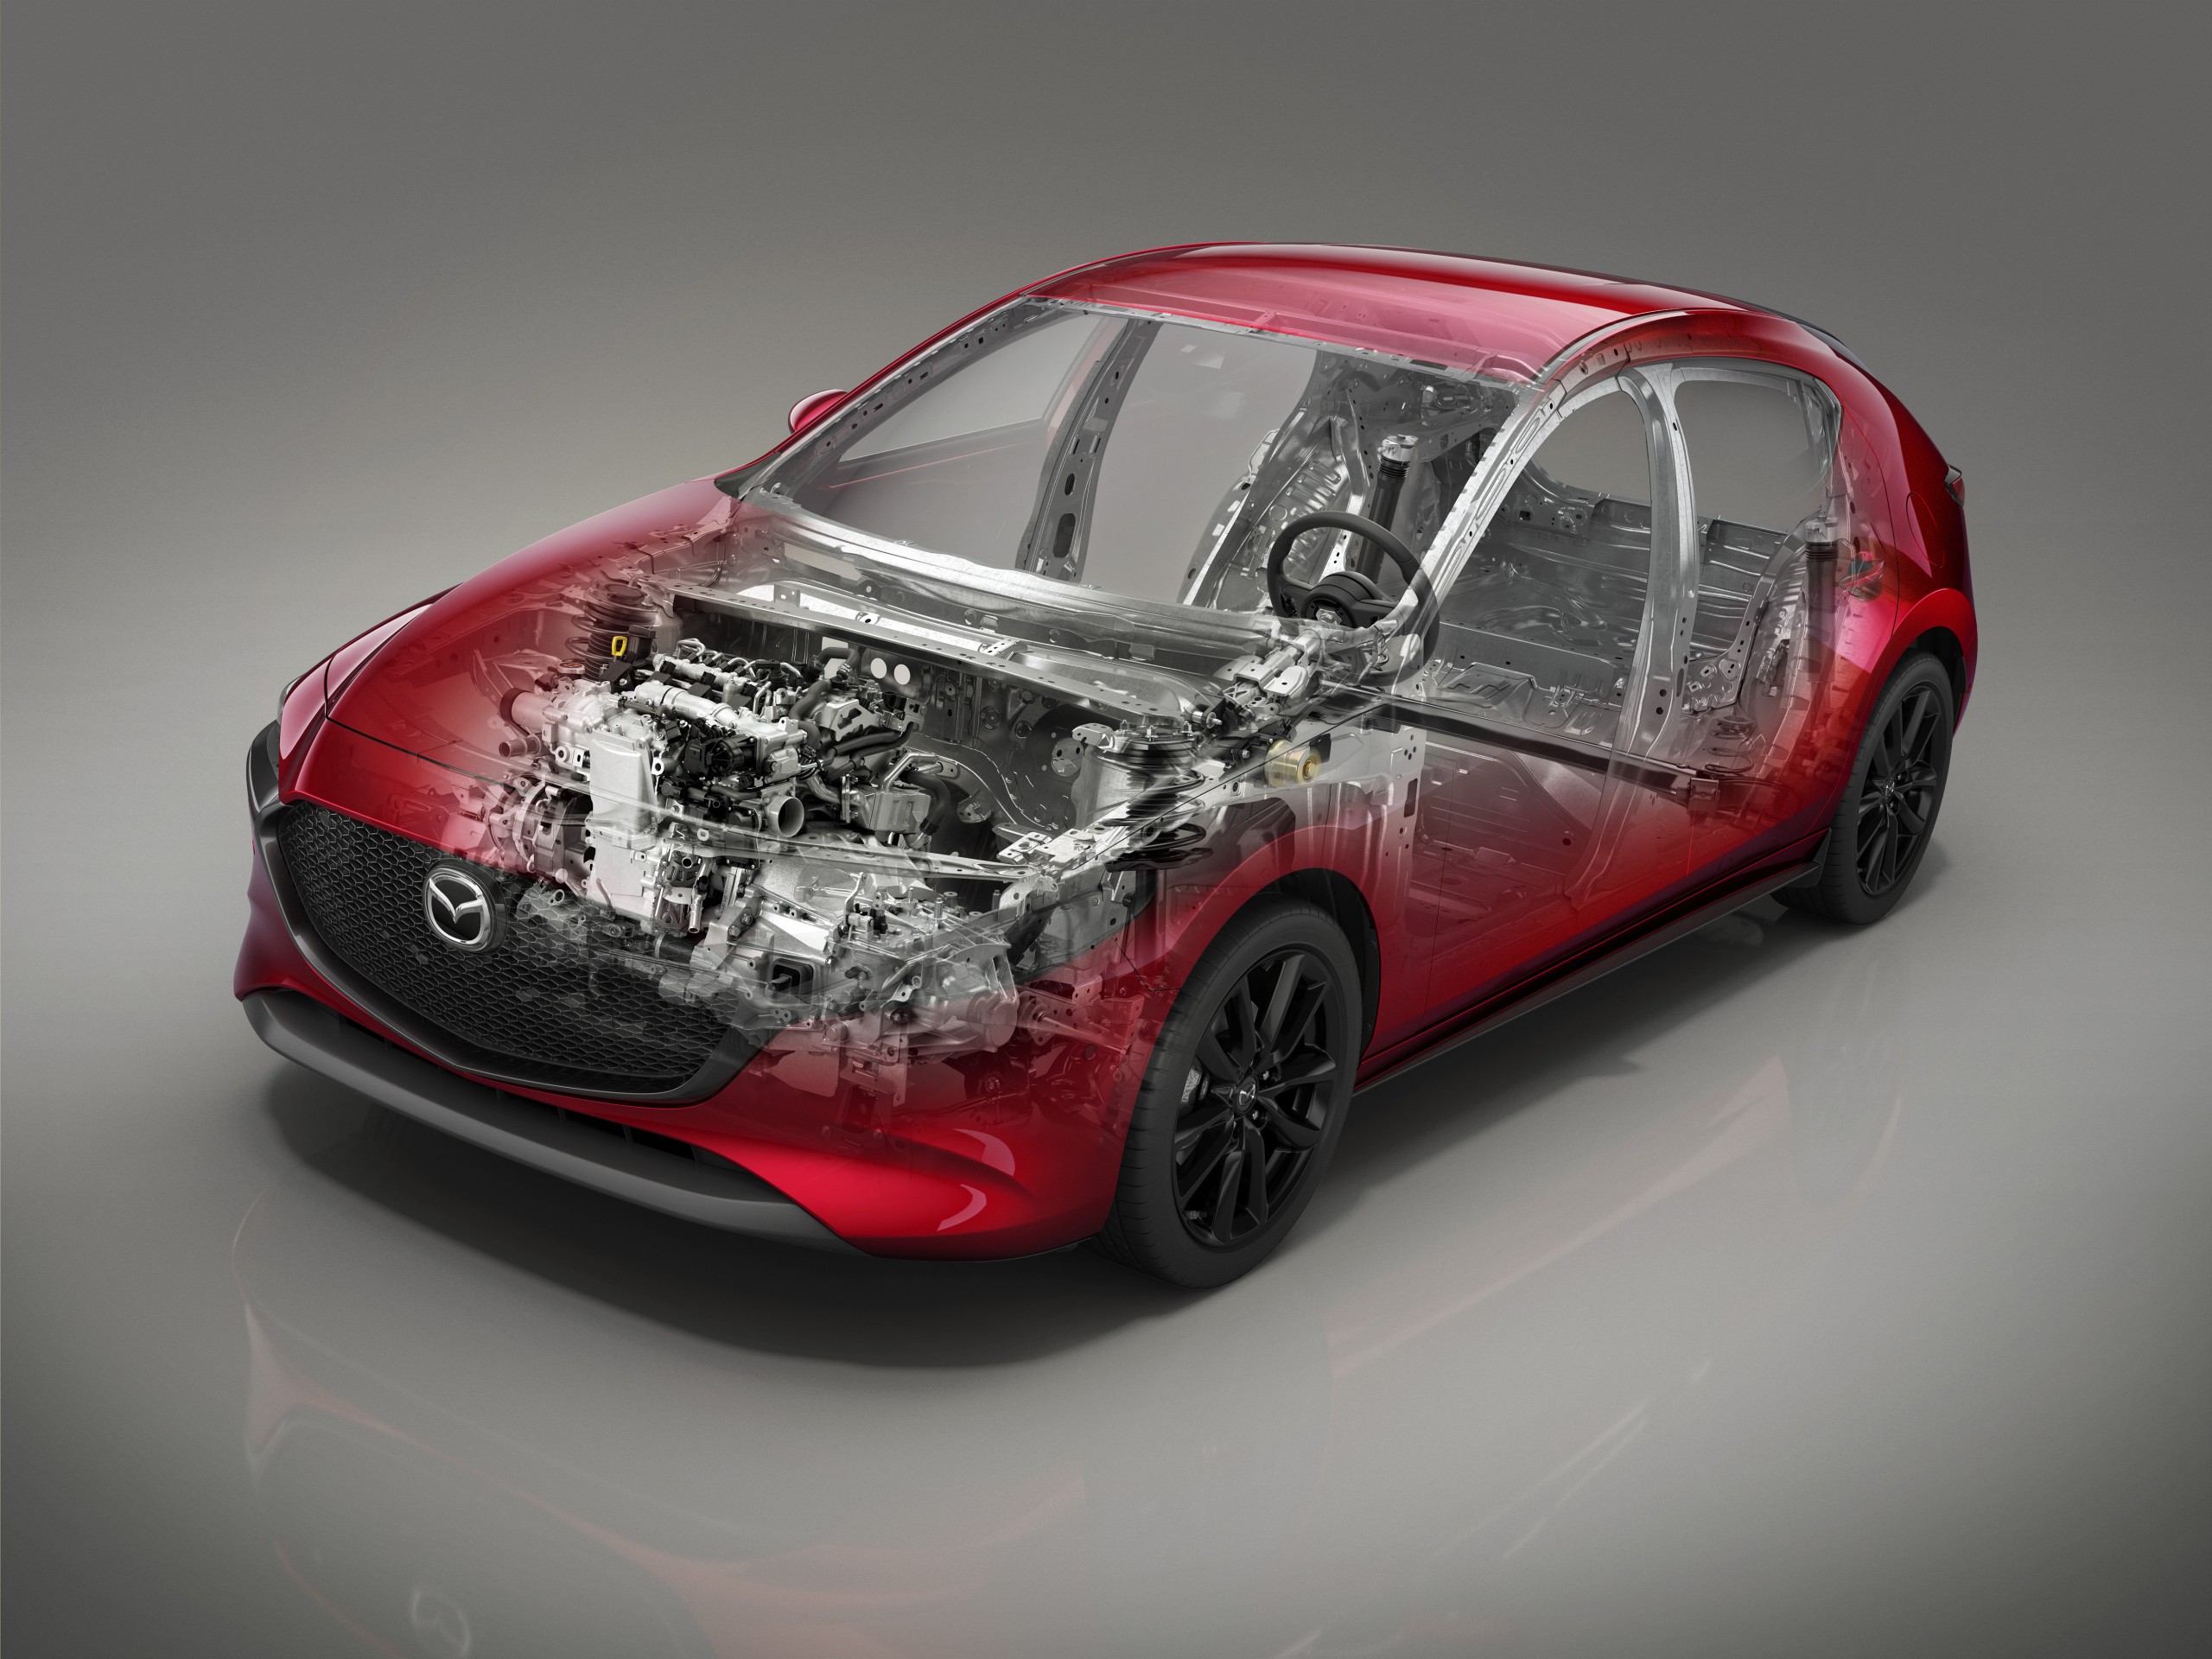 42_All-New-Mazda3_Technical_See-through_HB